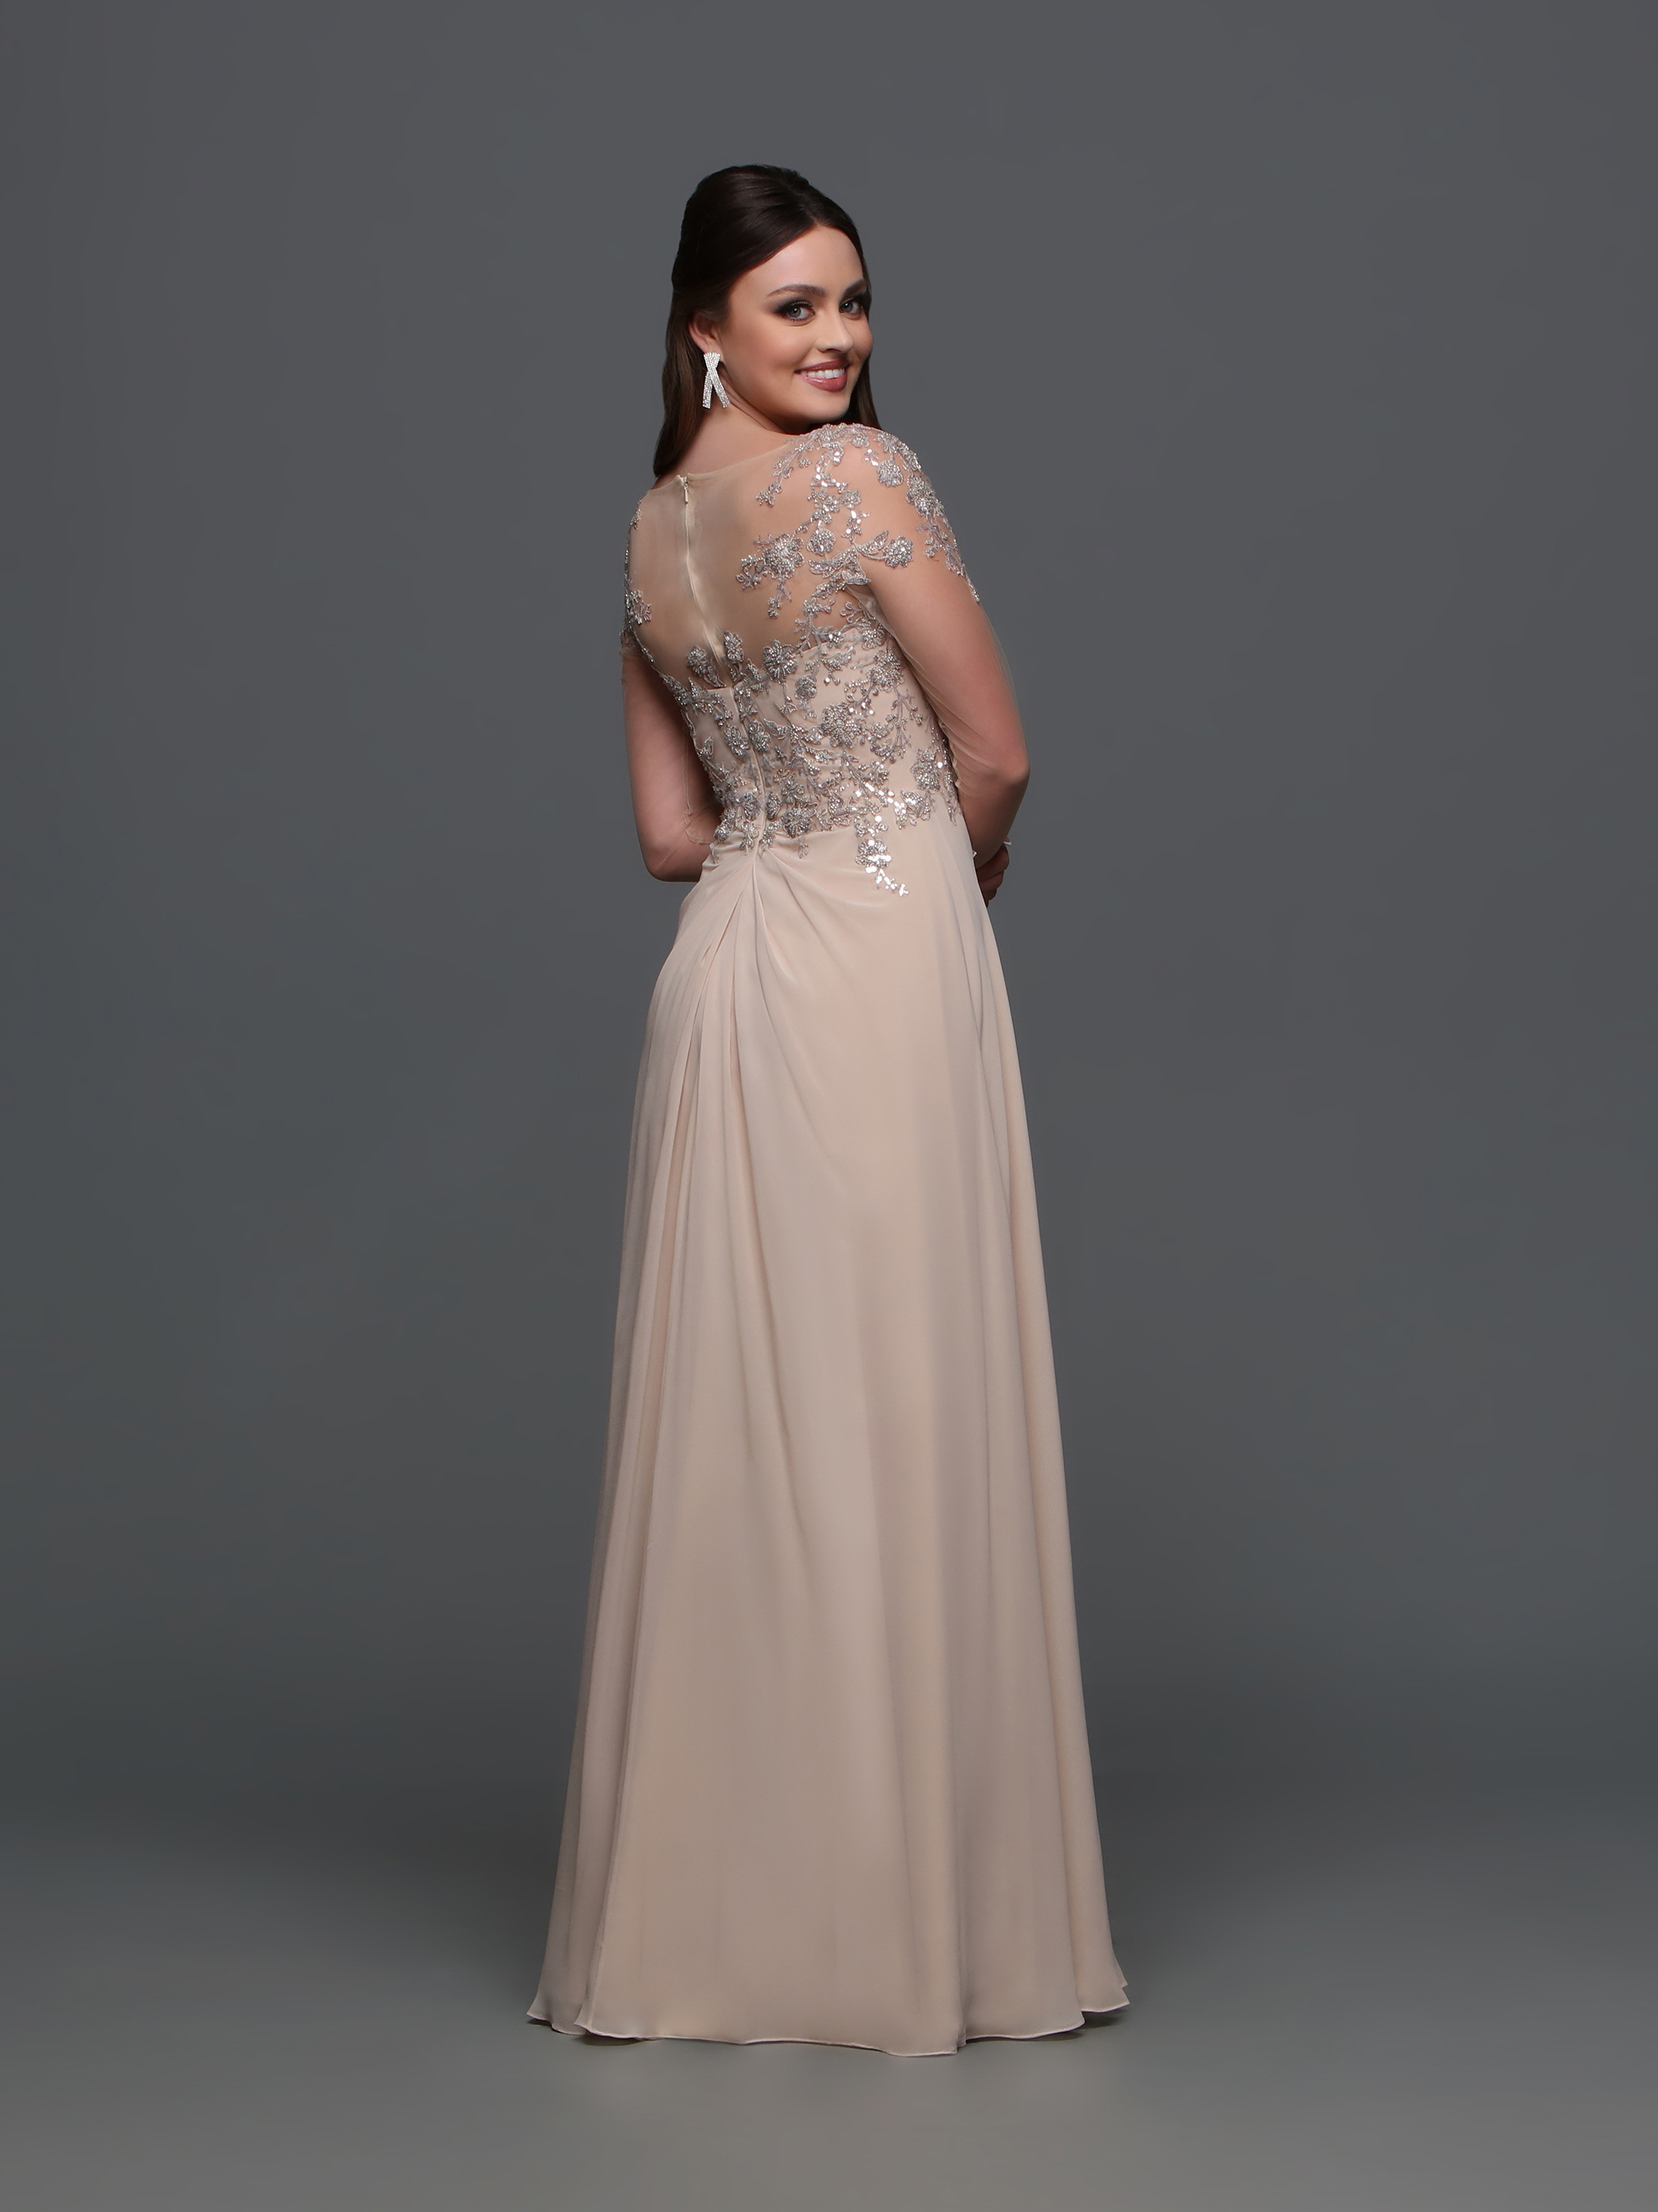 Image showing back view of style #60638